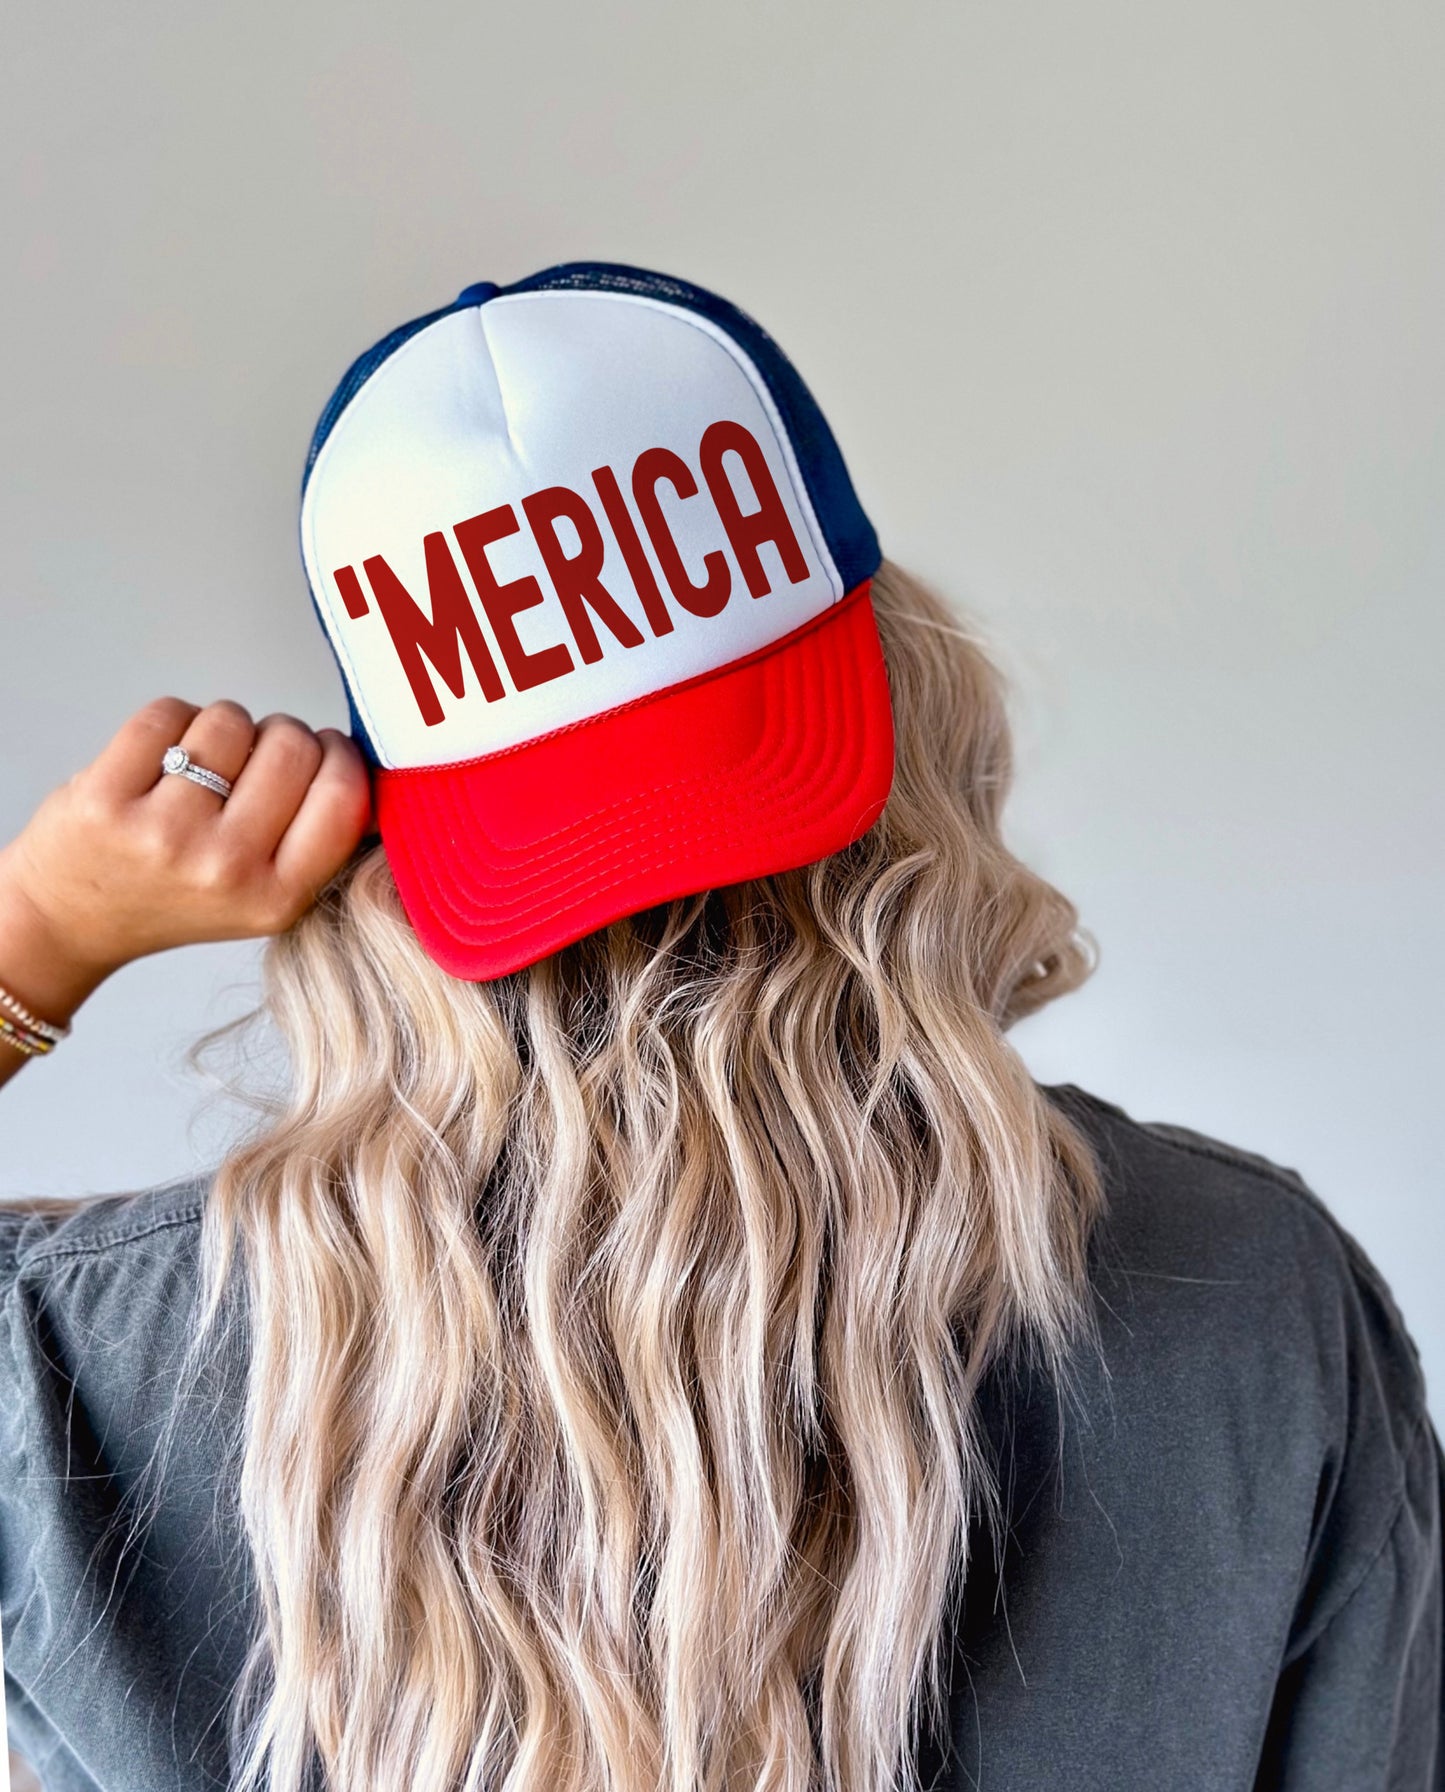 Merica USA Trucker Hat/ Mens Trucker Hats/ Funny Fathers Day Gift/ July 4th Hat